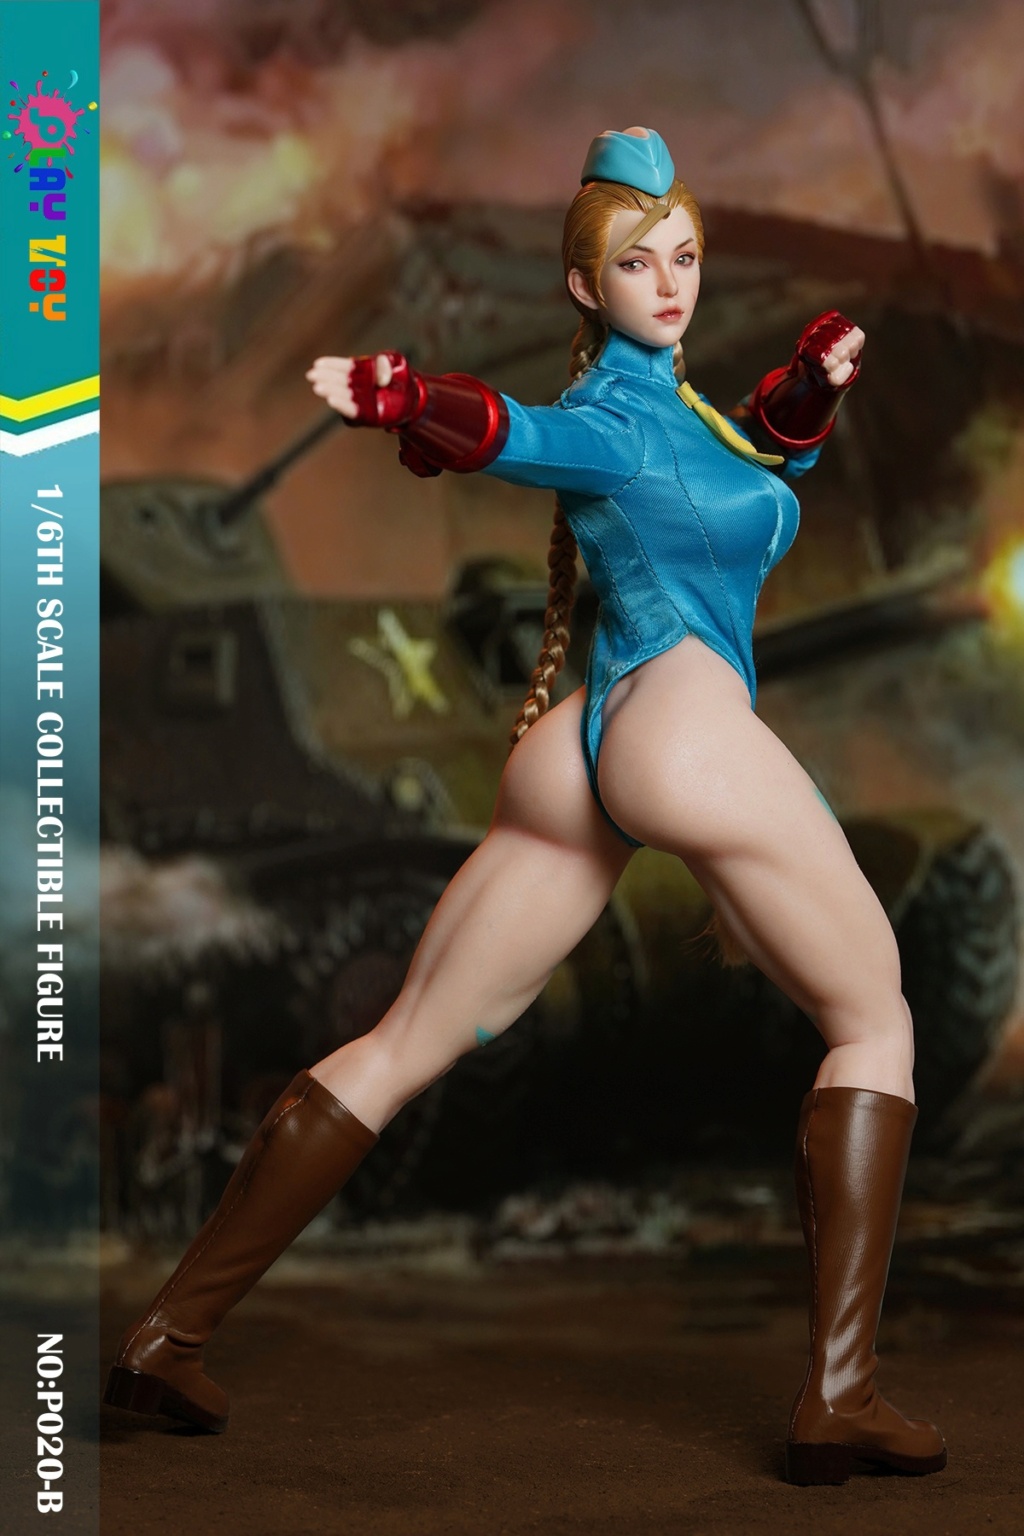 FemaleFighter - NEW PRODUCT: Play Toy: P020 1/6 Scale Female Fighter in 2 styles 11442511